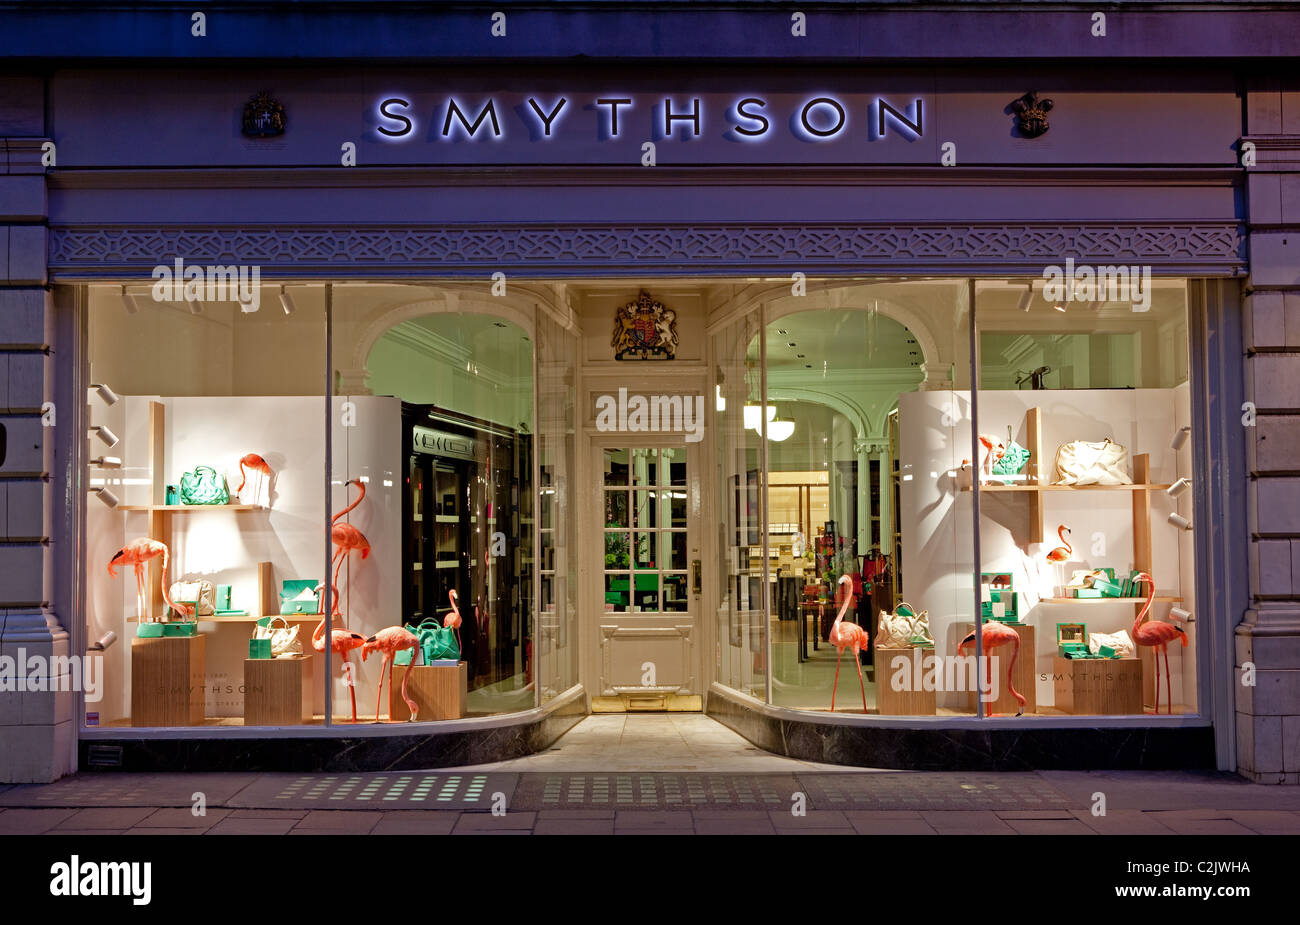 Symthson store in New Bond Steet, London in the evening Stock Photo